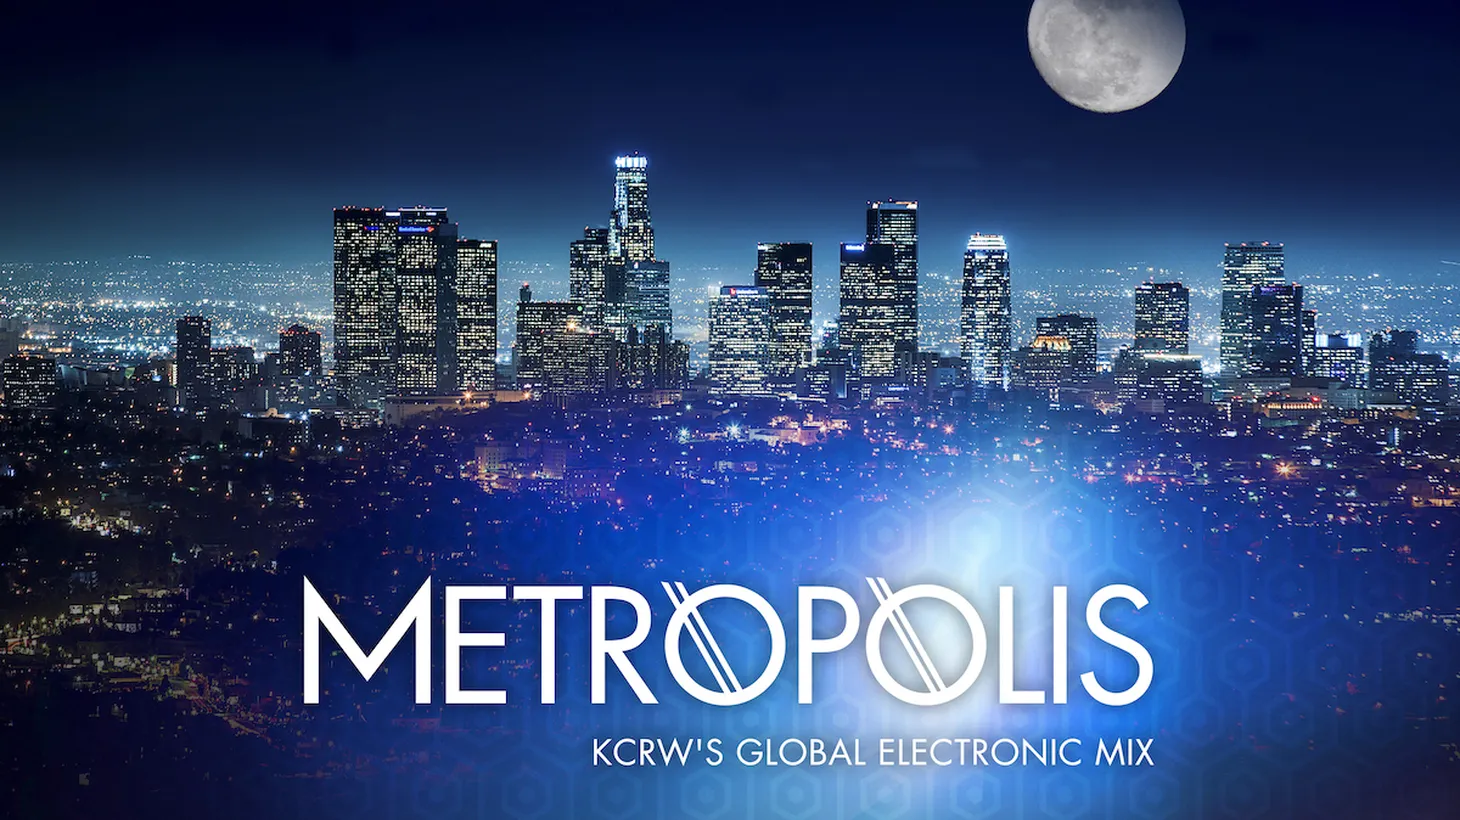 Metropolis this week features new releases from the Parisian record label Kitsune, fresh sounds from our Dutch pals Kraak & Smaak, and acclaimed veteran producer Dennis Ferrer sends us a feel good House anthem. Get ready for a bootyquake!